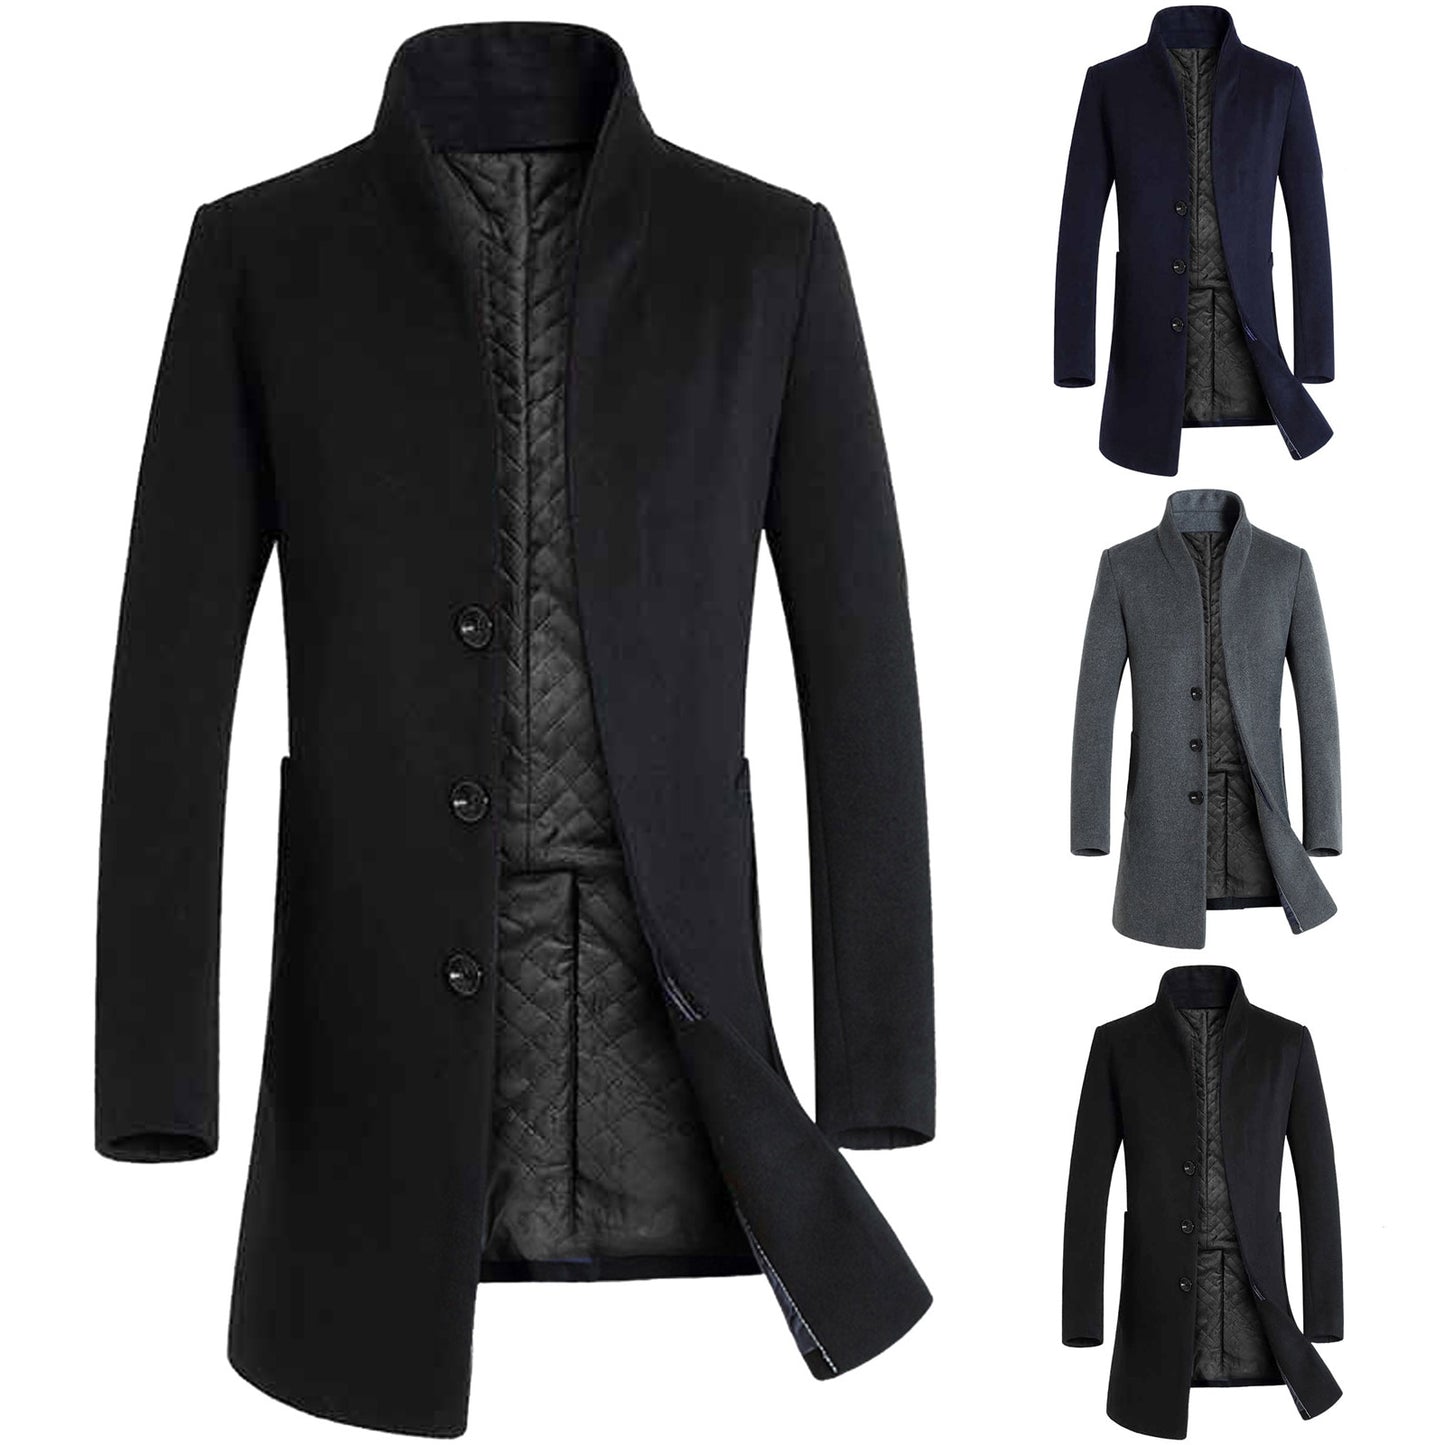 Men's Trench Coats. Winter, Mid-length, Casual Solid Single Breasted Long Sleeve Lapel Collar Overcoat